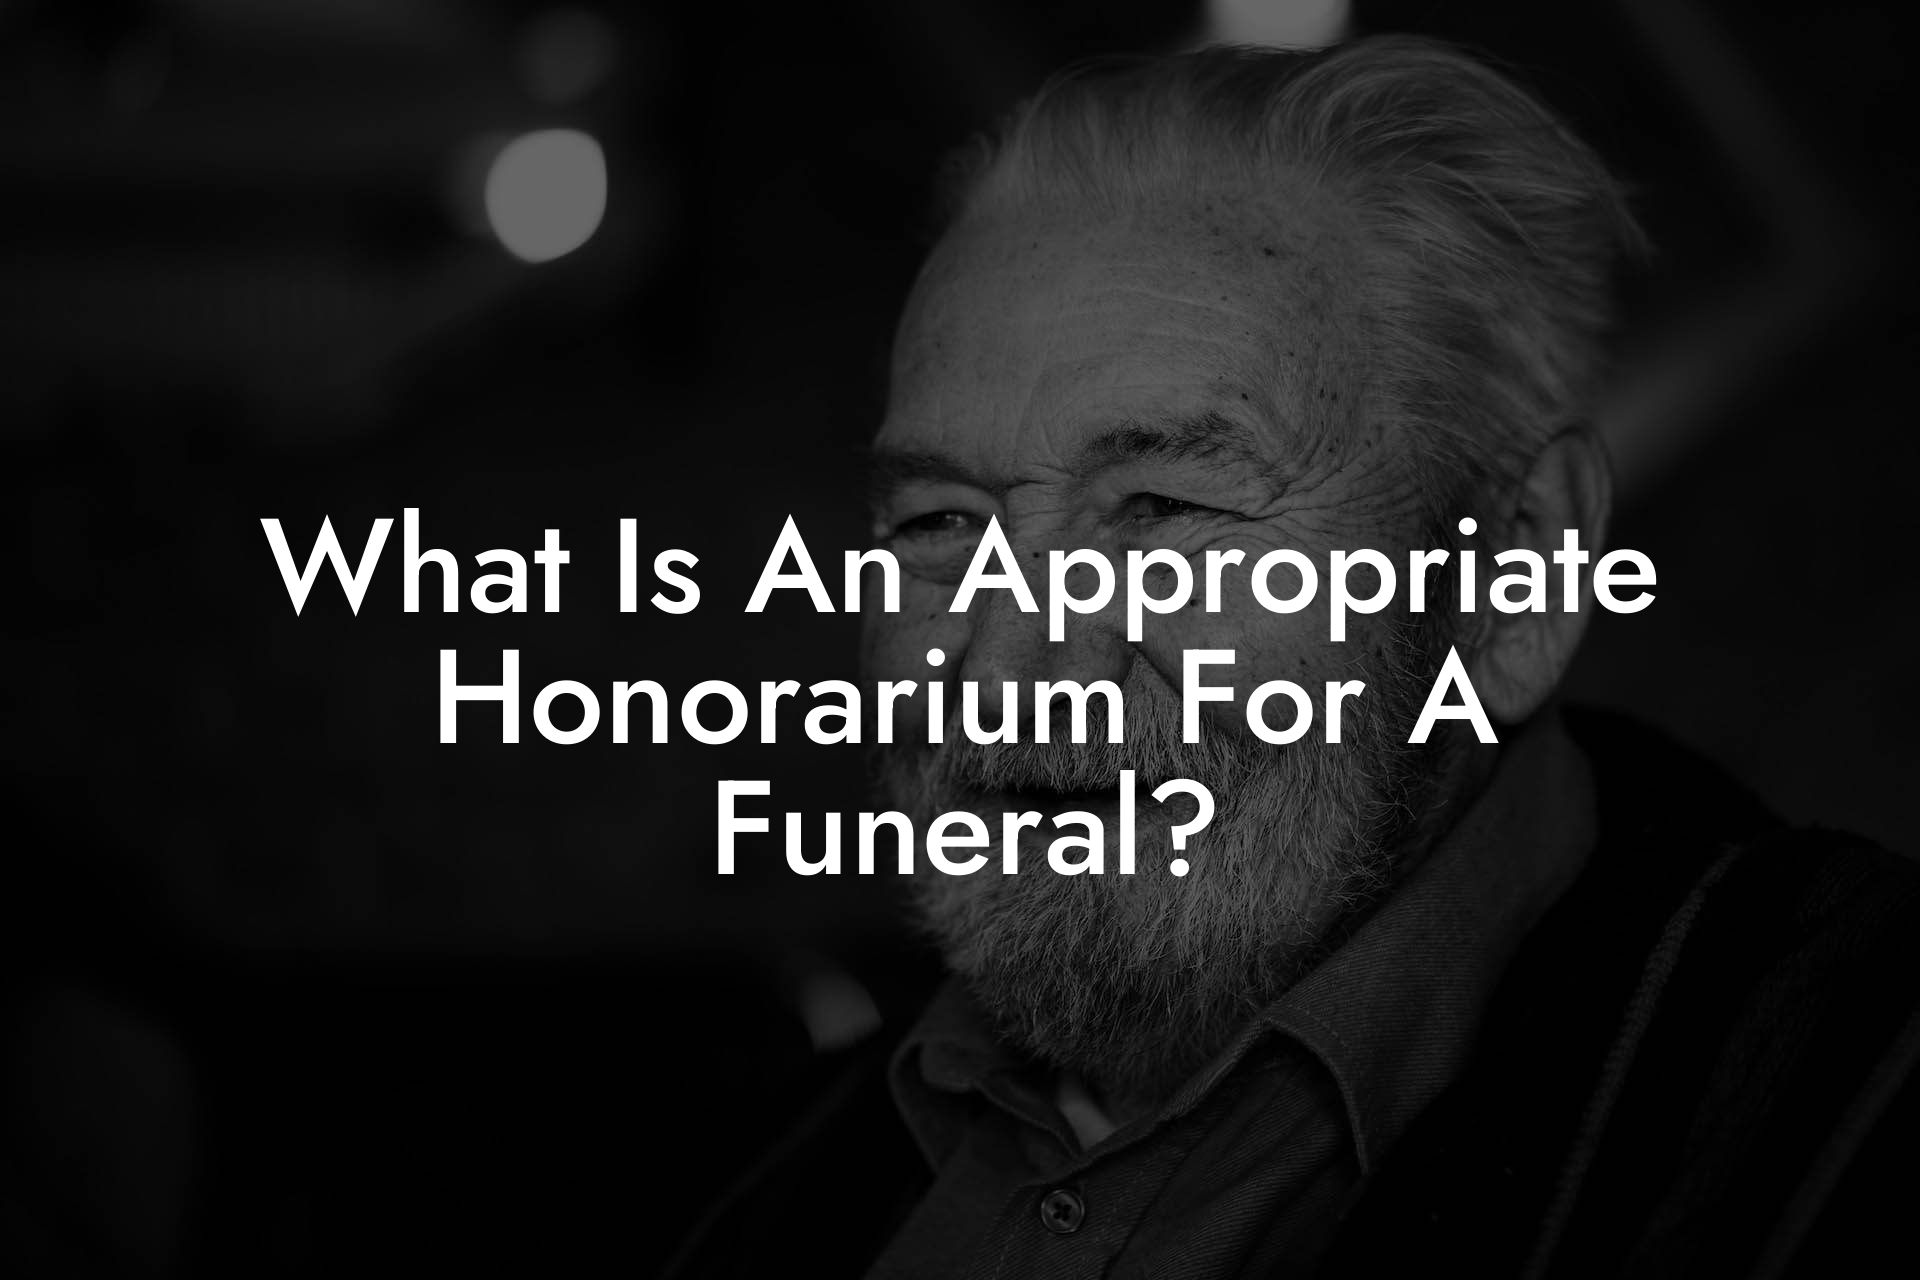 What Is An Appropriate Honorarium For A Funeral?